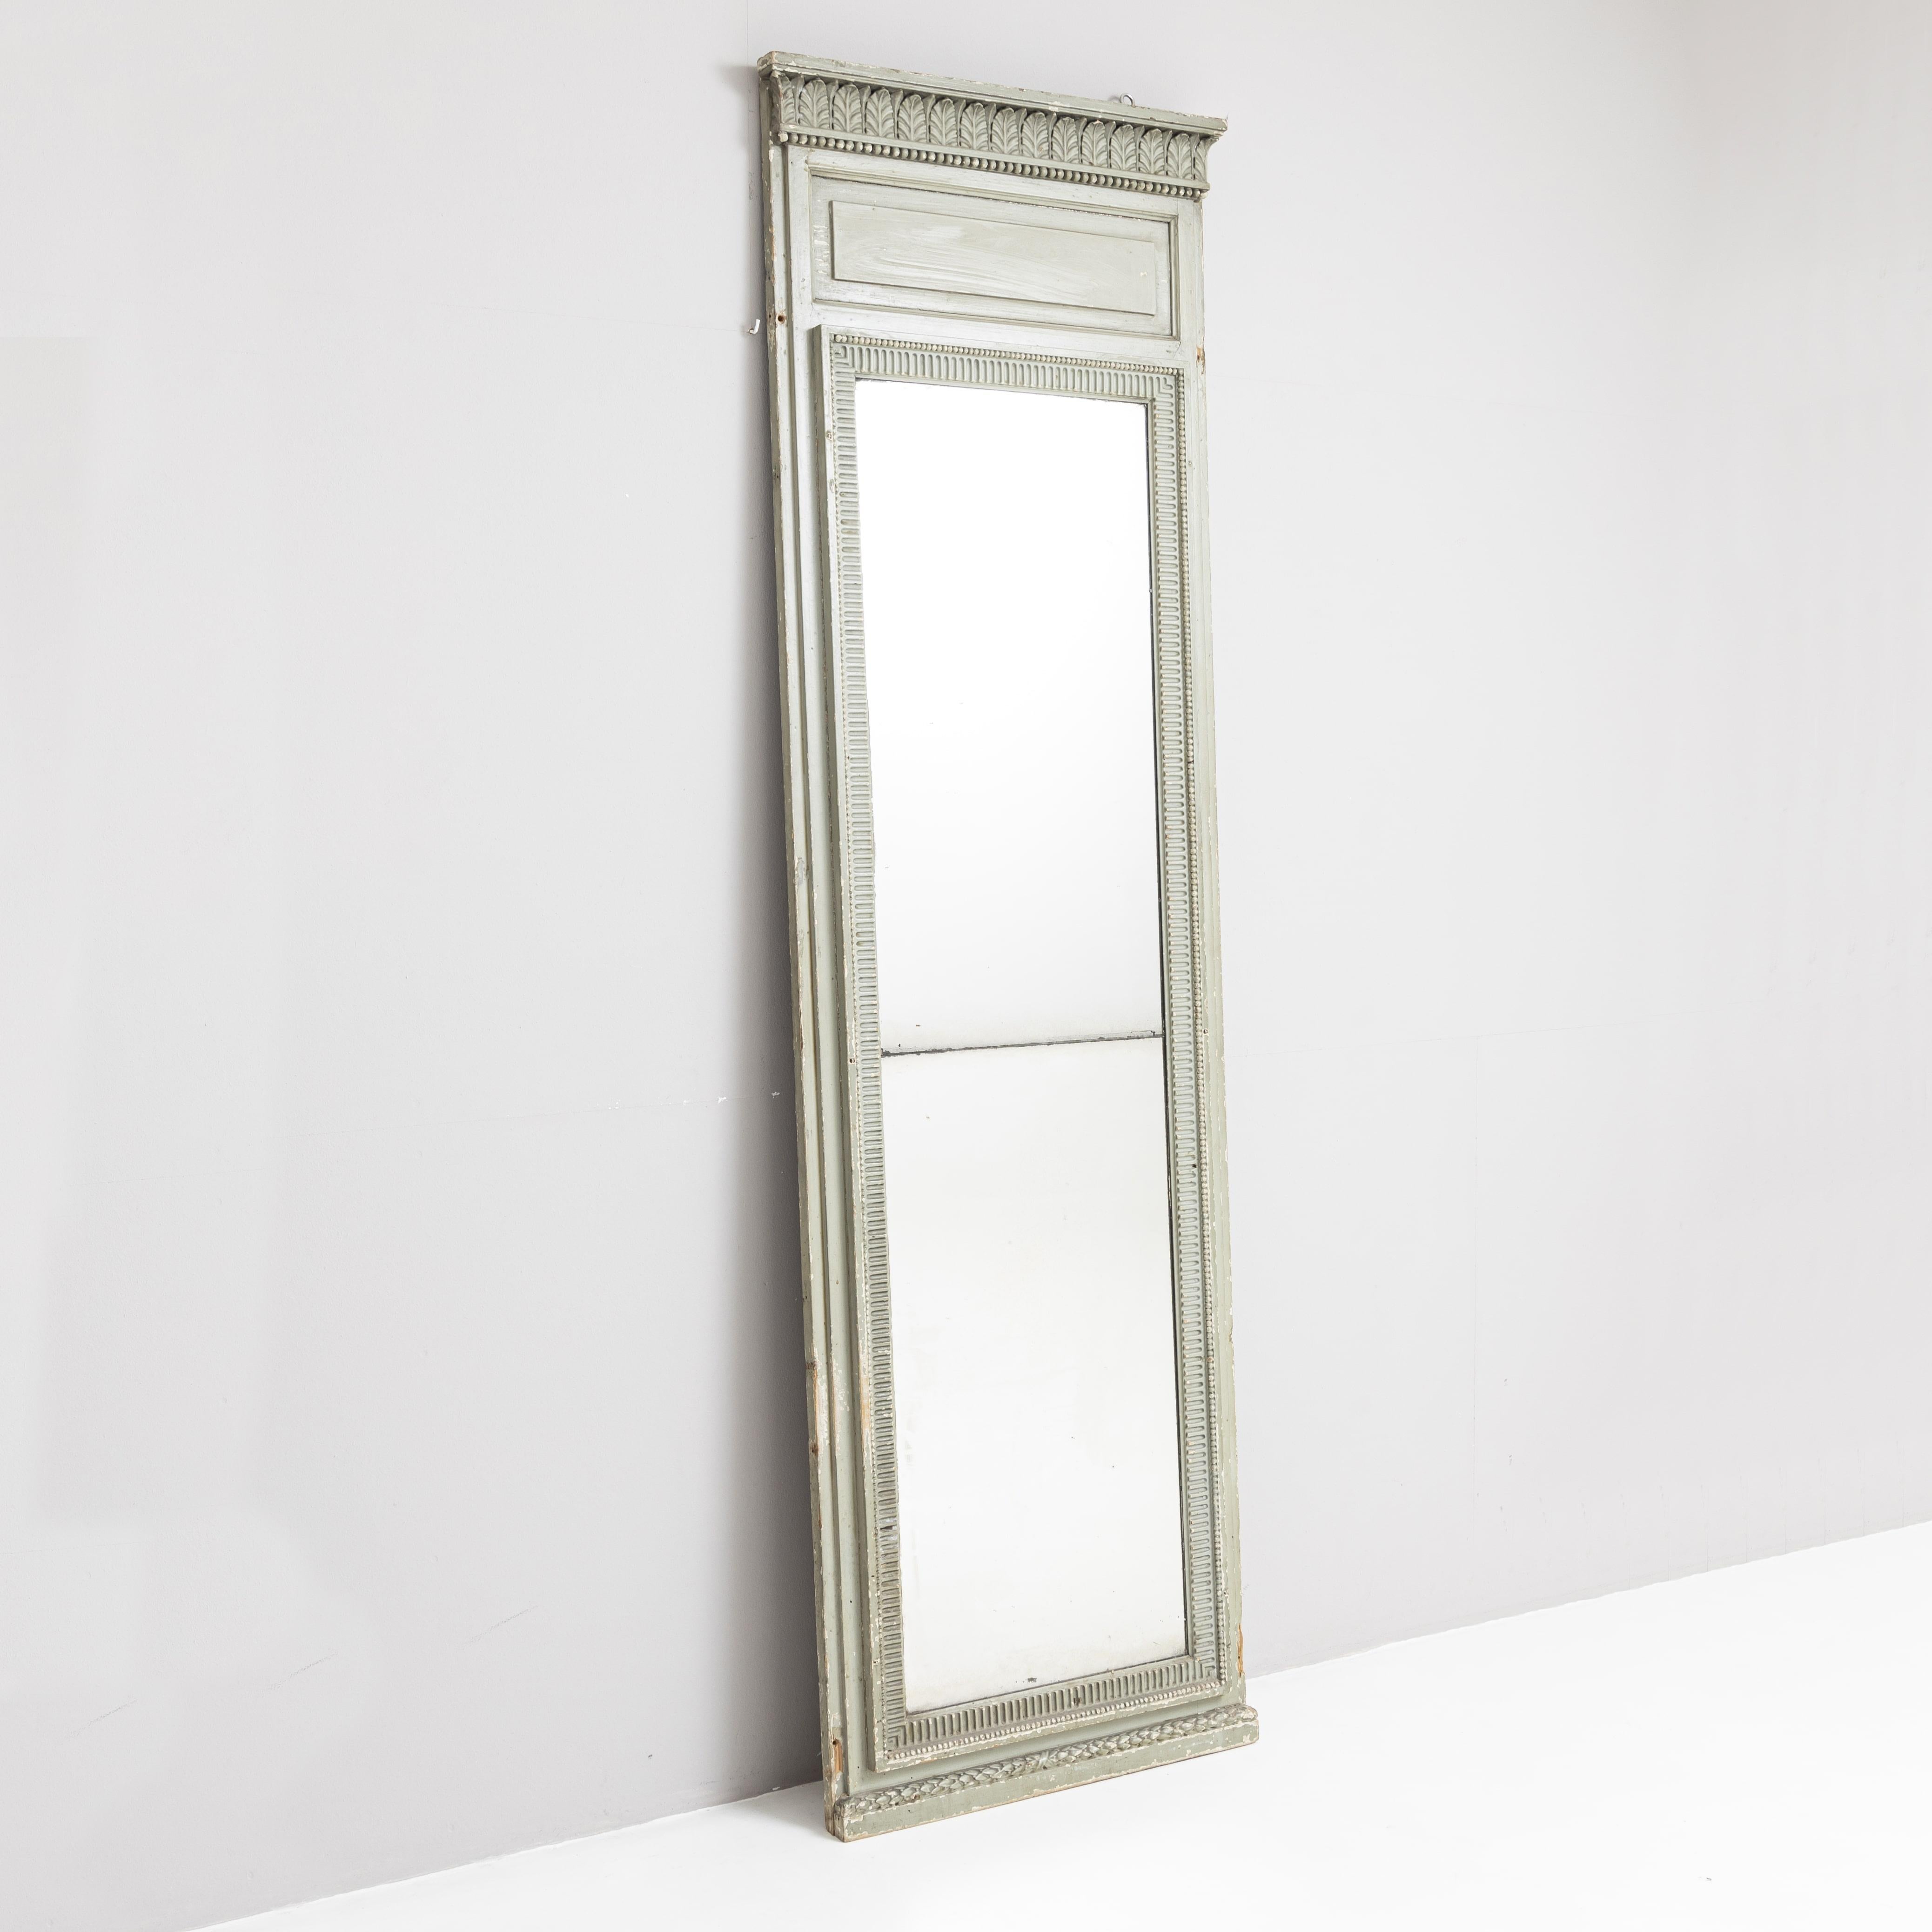 Large classicist pillar mirror in original light green paint with carved acanthus leaf and dentil decoration. The painting is rubbed in places.